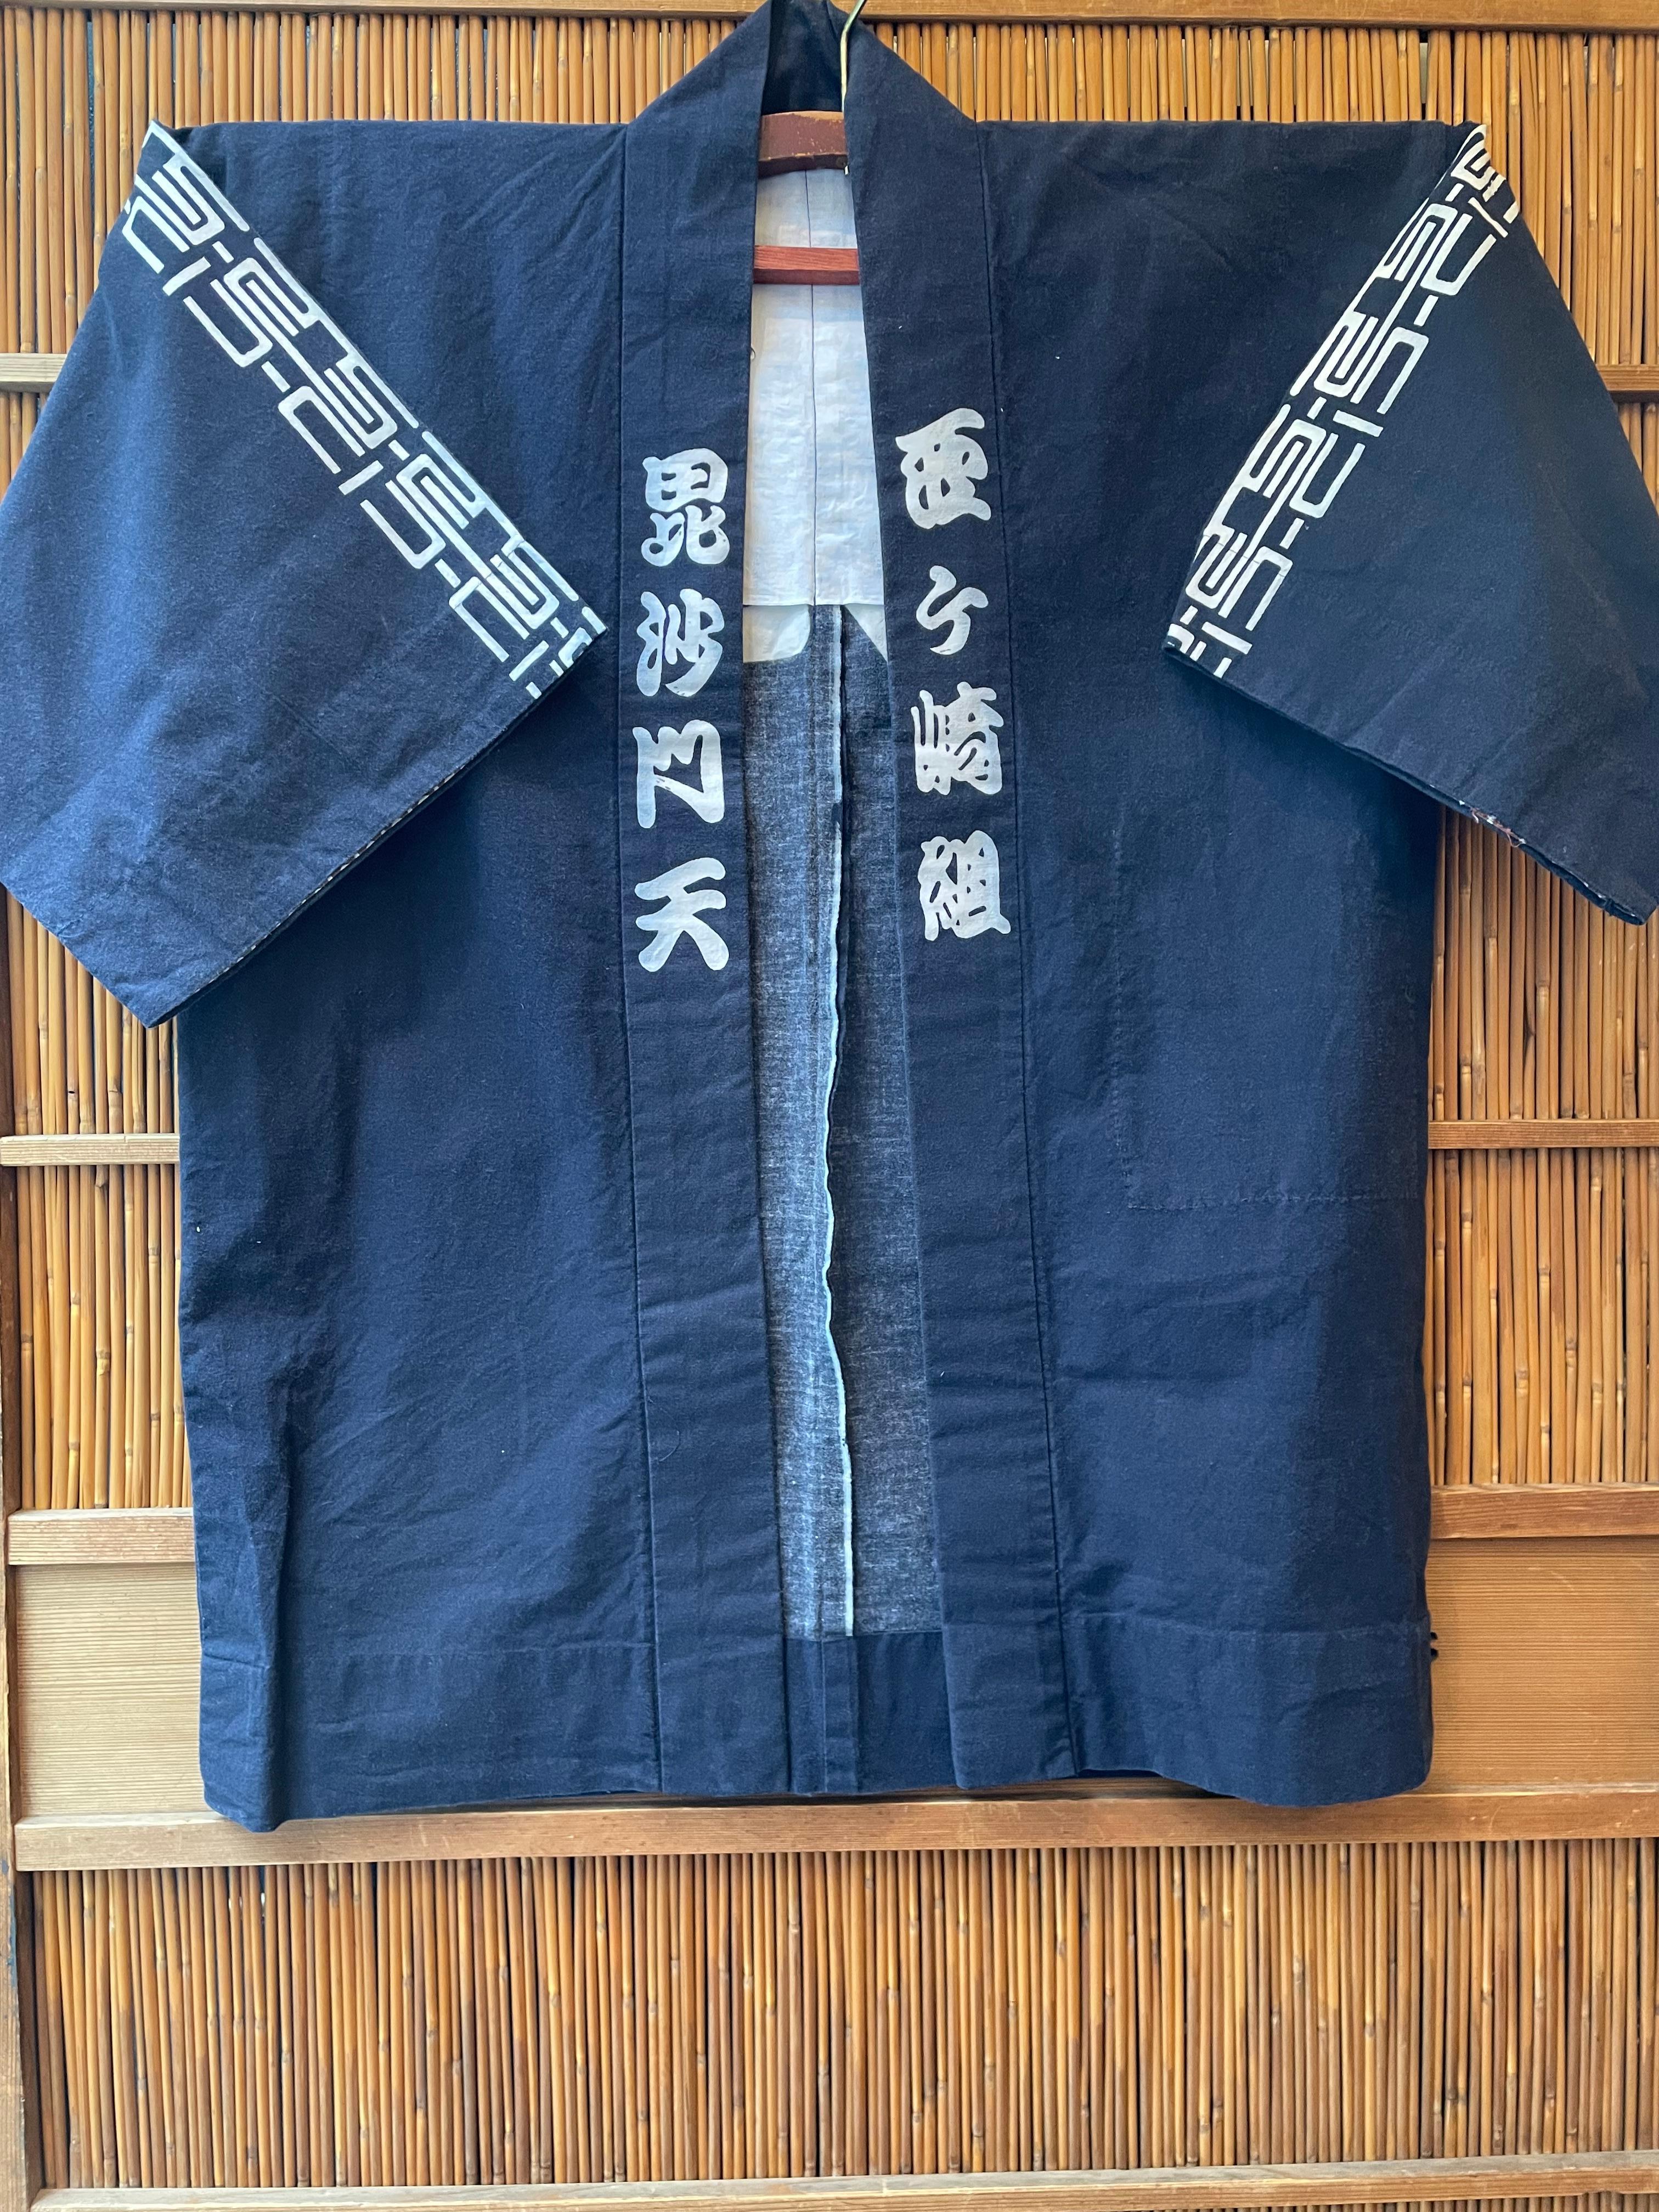 This is a jacket with cotton which was made in Japan.
These kind of jackets are called Hanten in Japanese. 
Hanten is a short jacket similar to a haori, but without a gusset. It is worn without a breast strap and without the collar folded